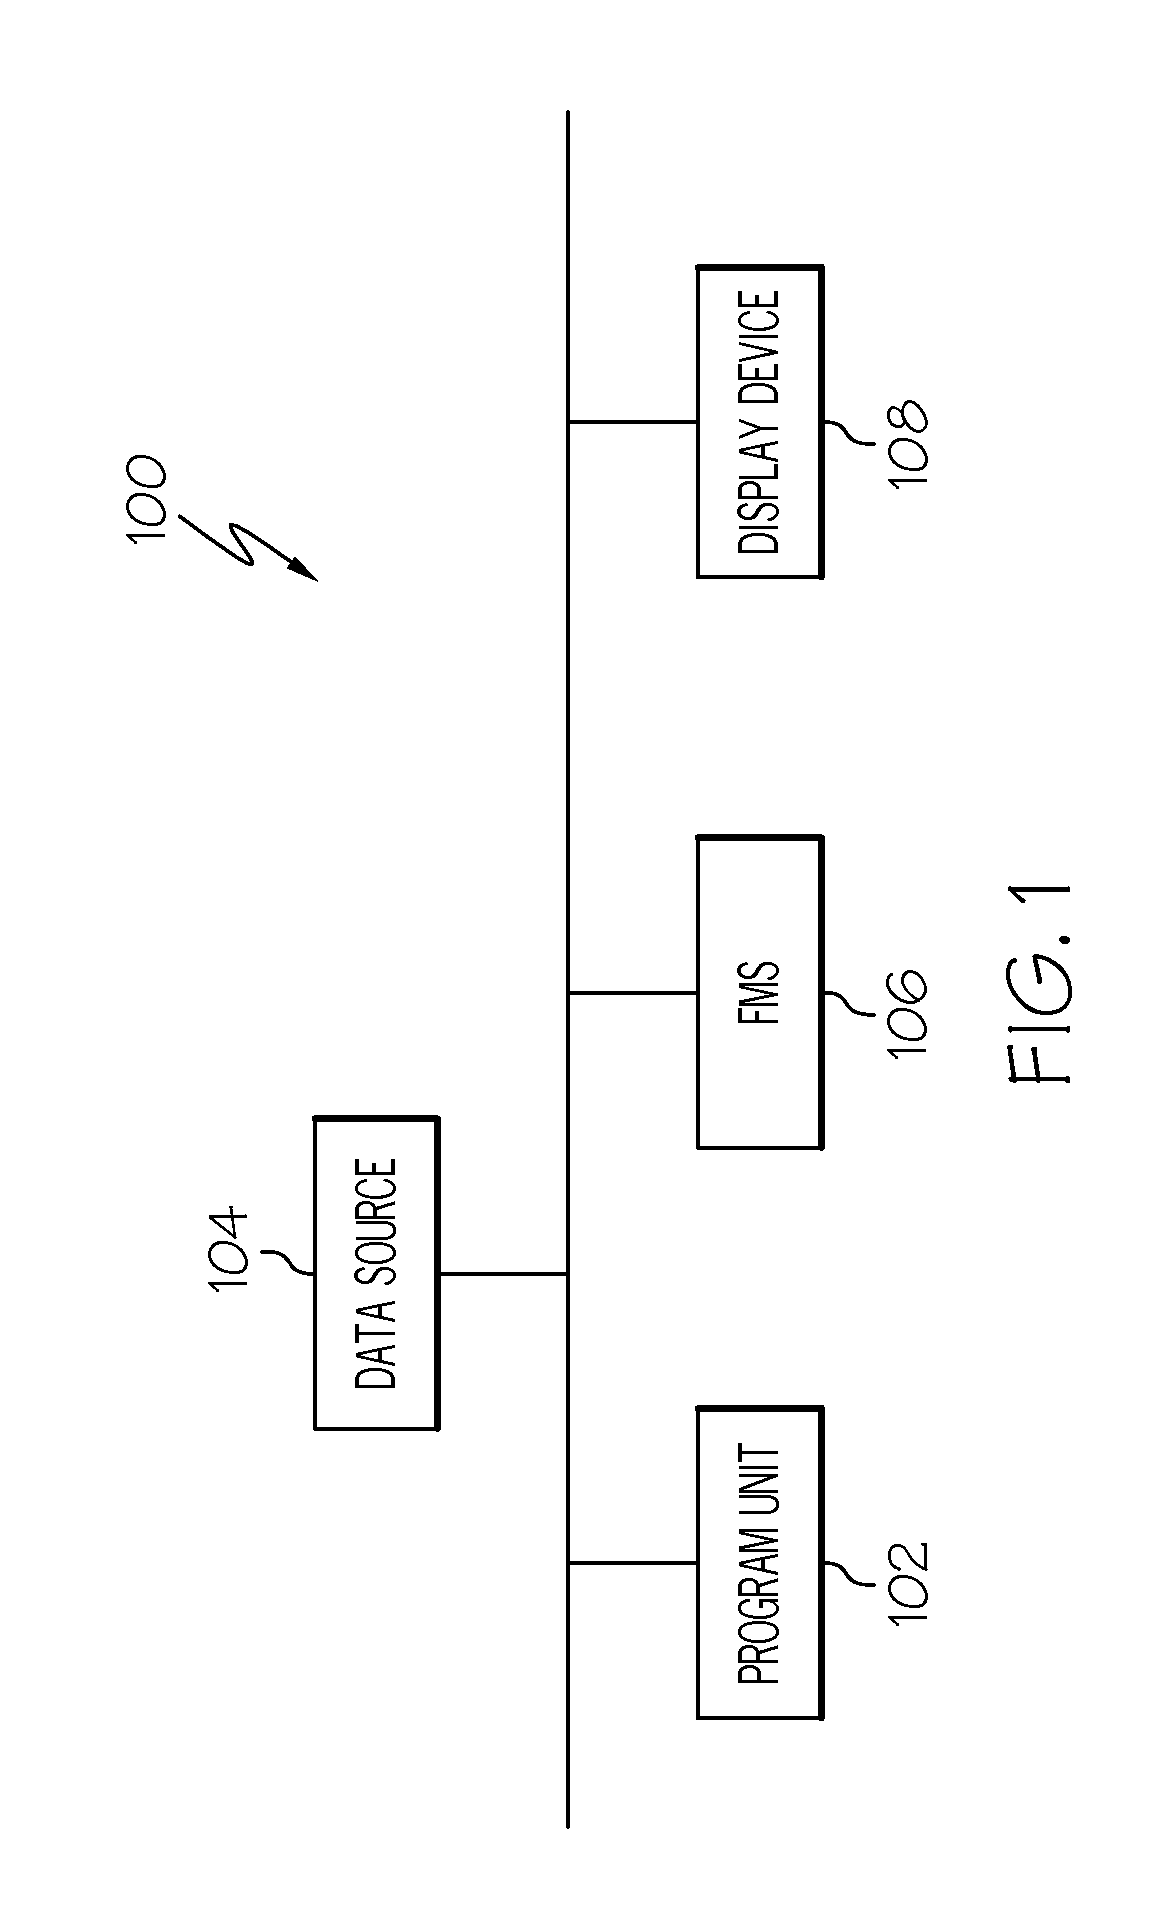 Synthetic vision systems and methods for displaying detached objects